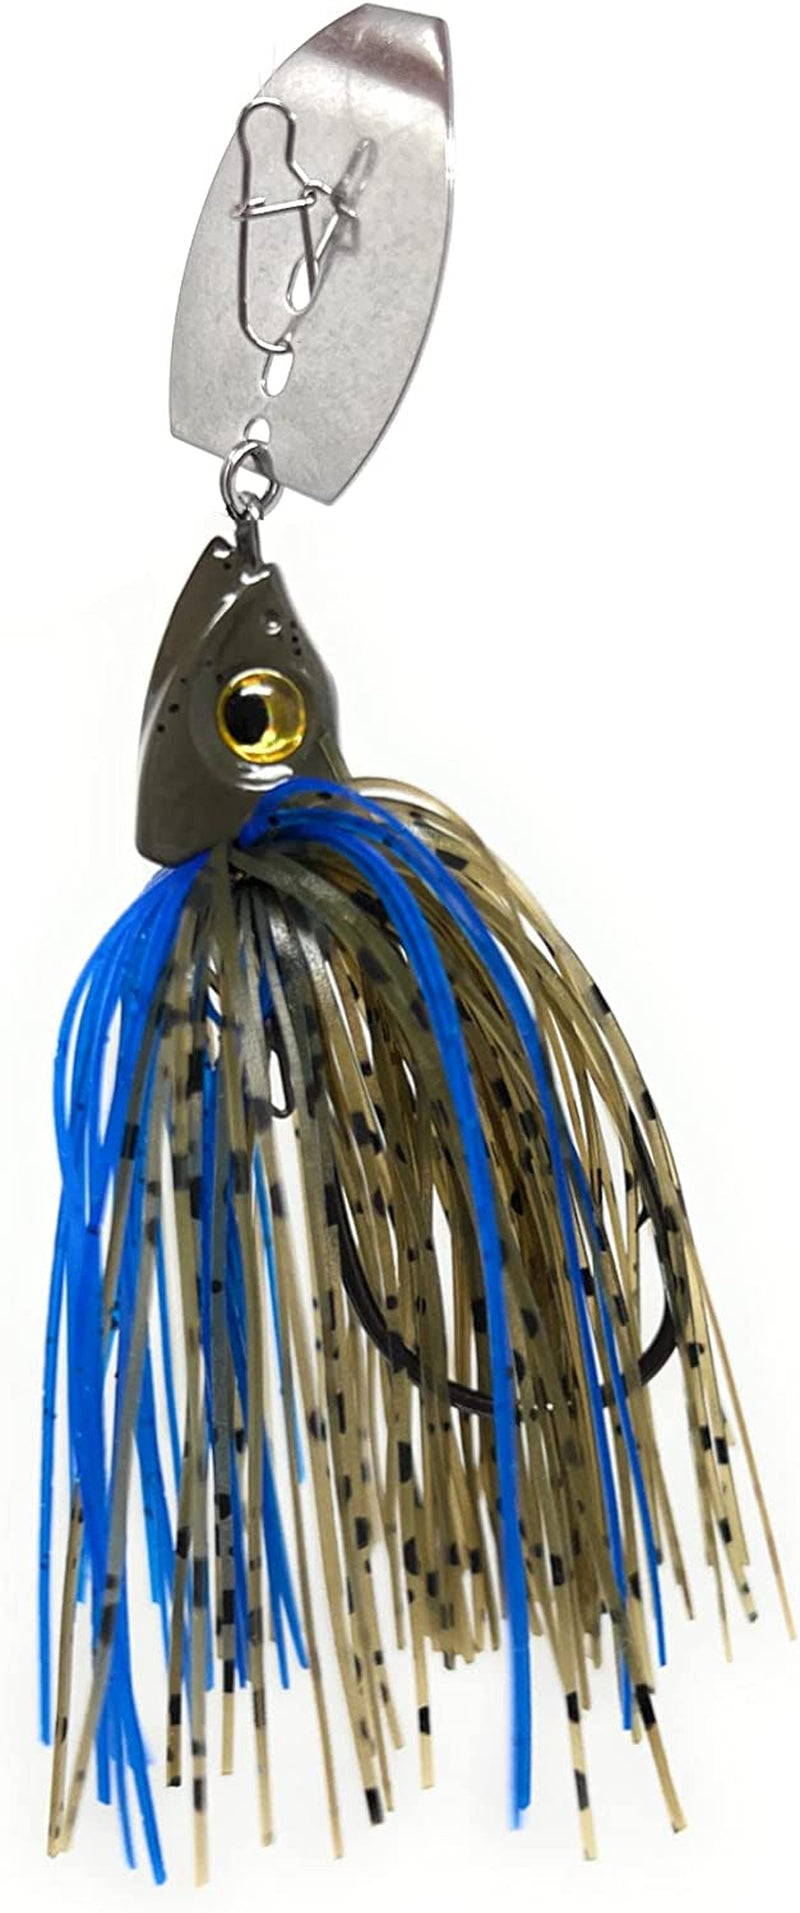 Tungsten Bladed Swim Jig Heads for Fishing - 2 Pack of Fishing Jigs for Large and Smallmouth Bass, Trout, Walleye - with Bladed Head to Make a Chatter Sound -Vibrating Spinner Bait